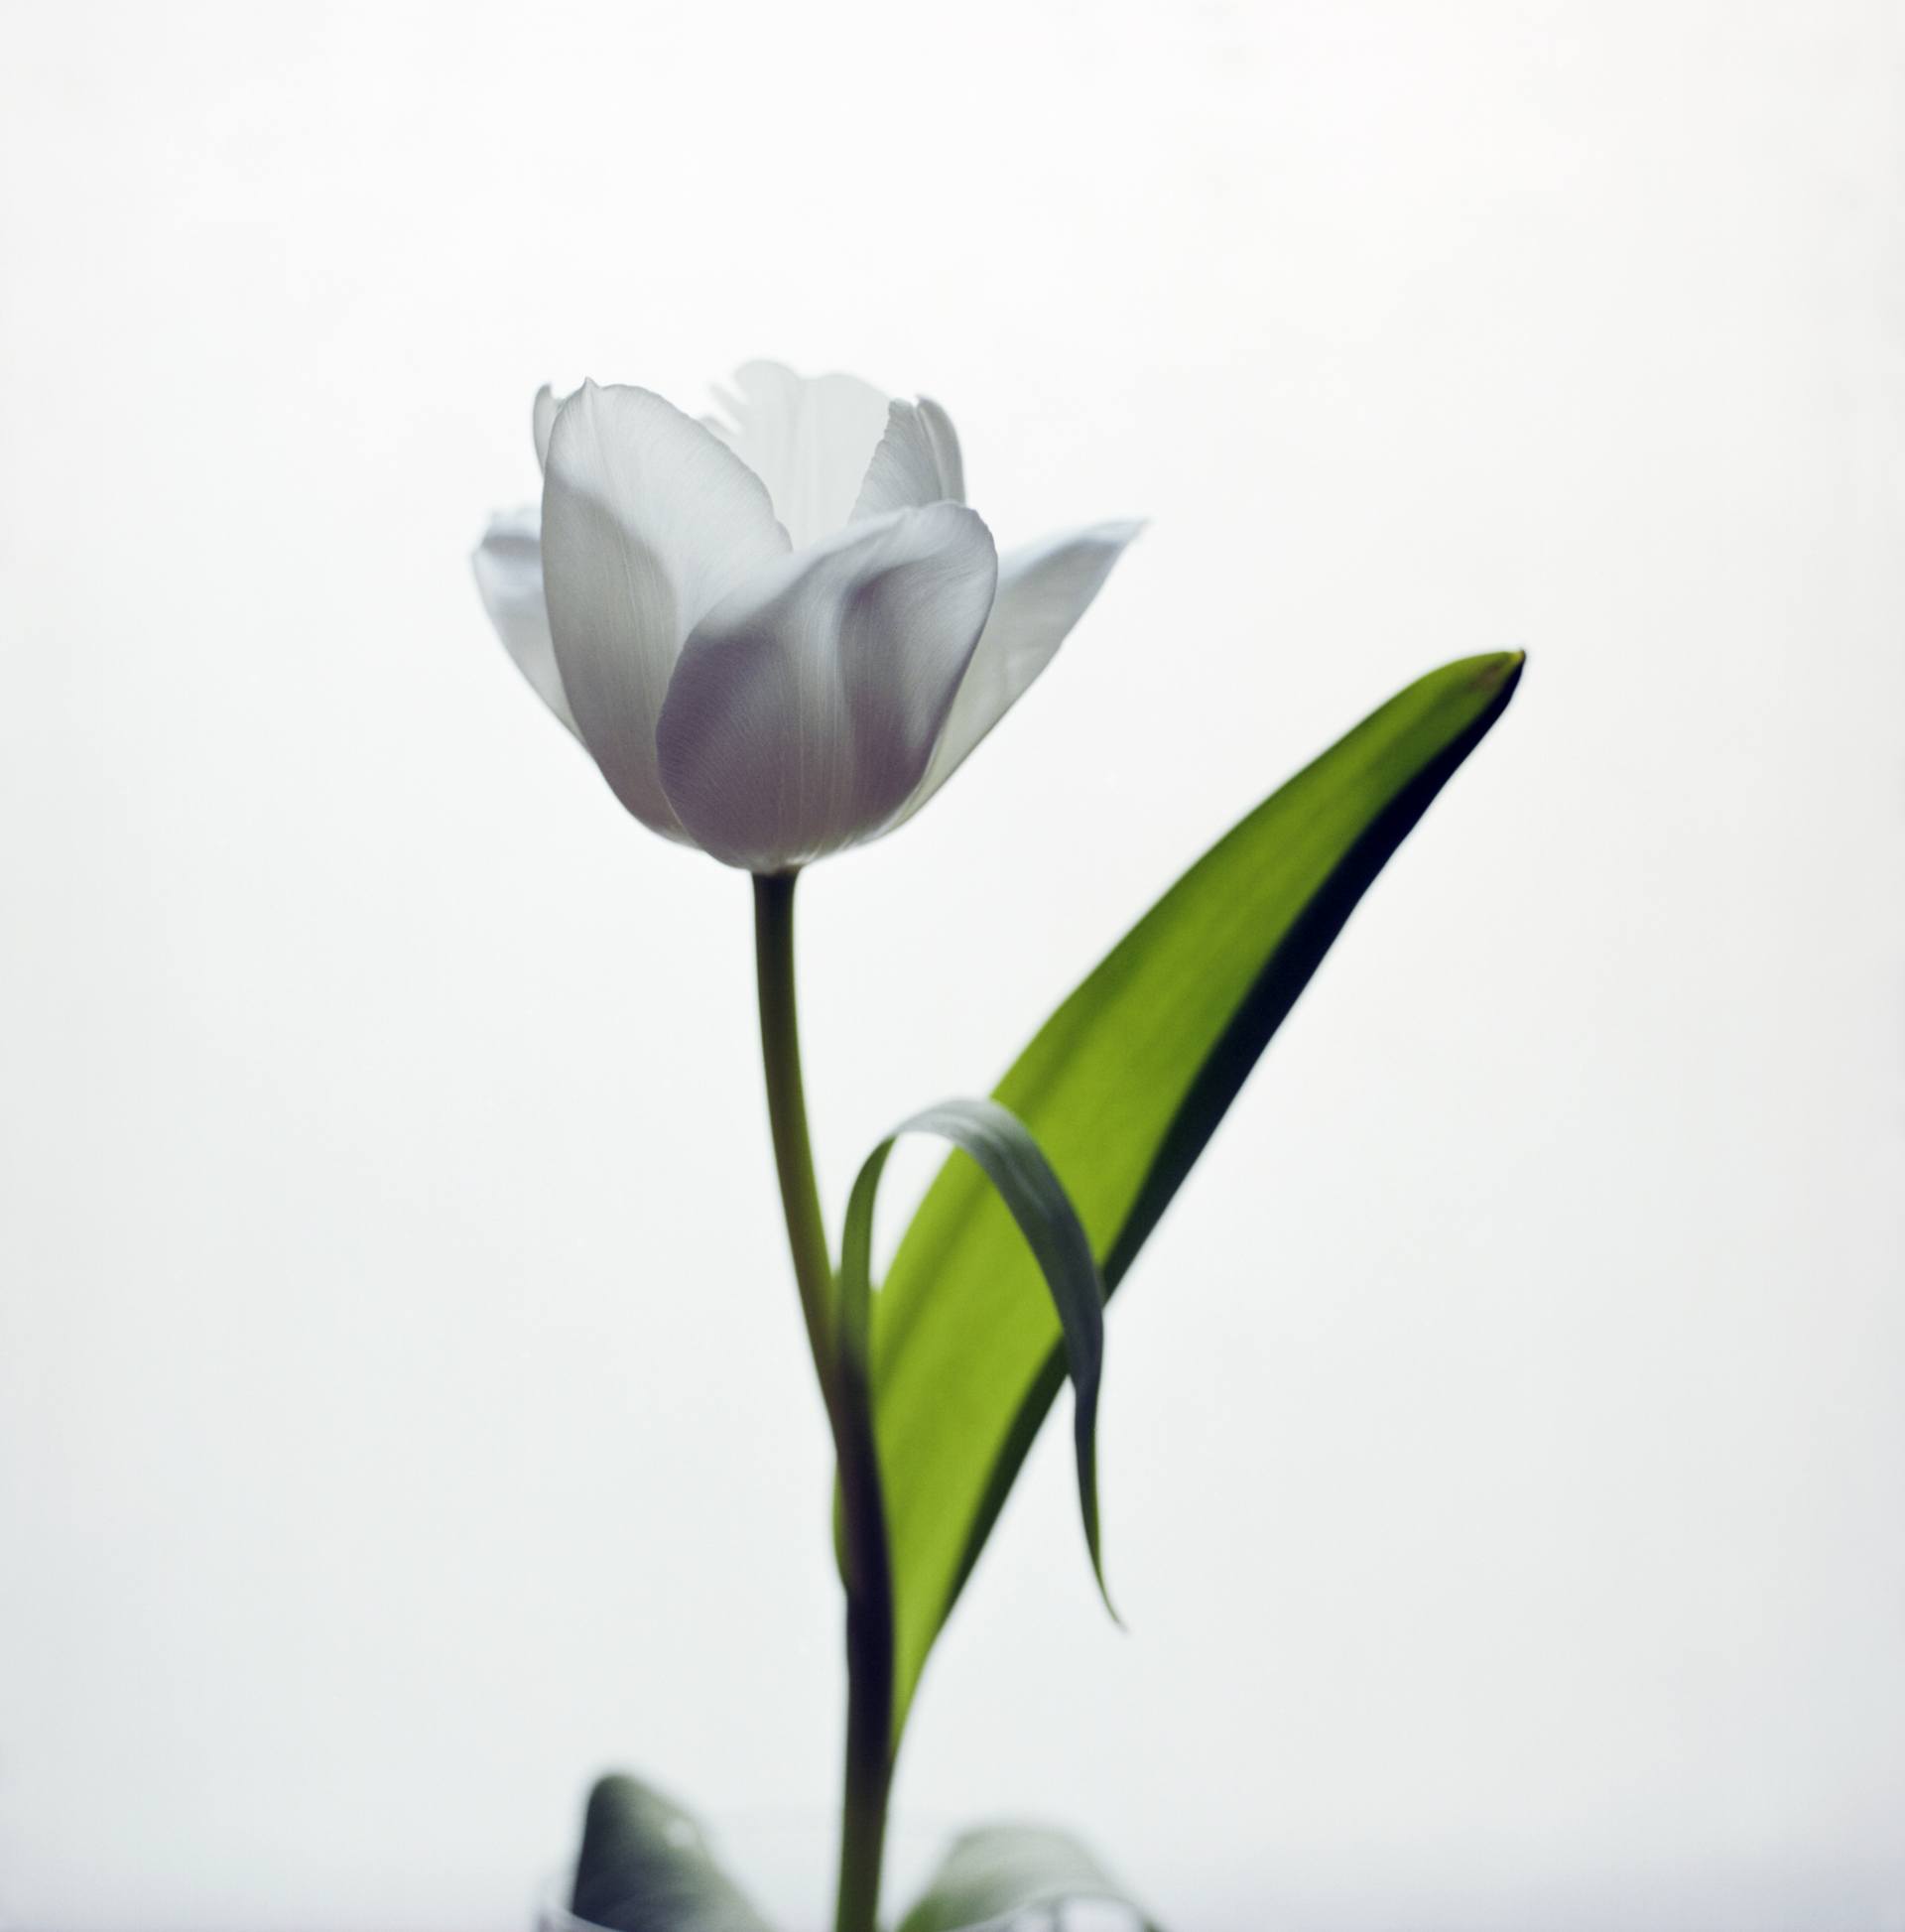 Saatchi Art: Single White Tulip Photography by Guy Sargent